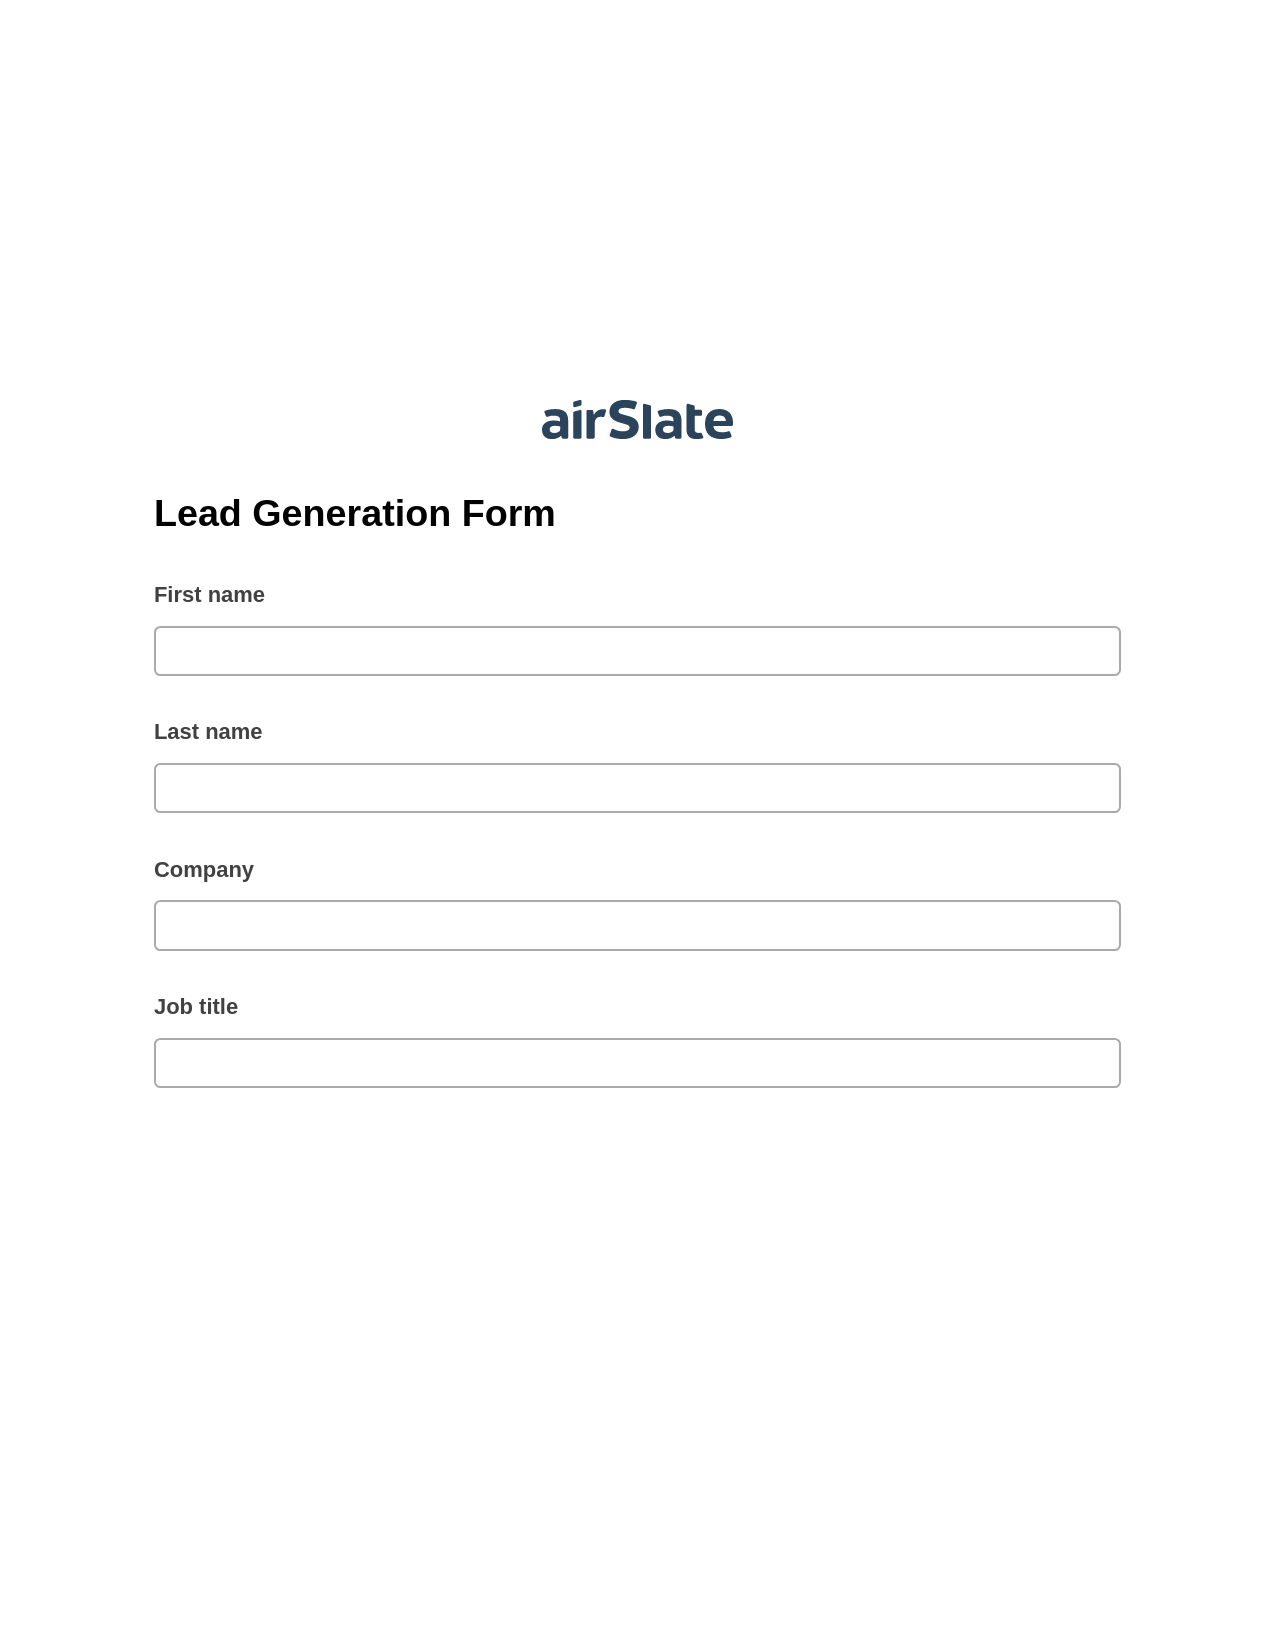 Lead Generation Form Pre-fill from Excel Spreadsheet Bot, Remove Tags From Slate Bot, Archive to Dropbox Bot